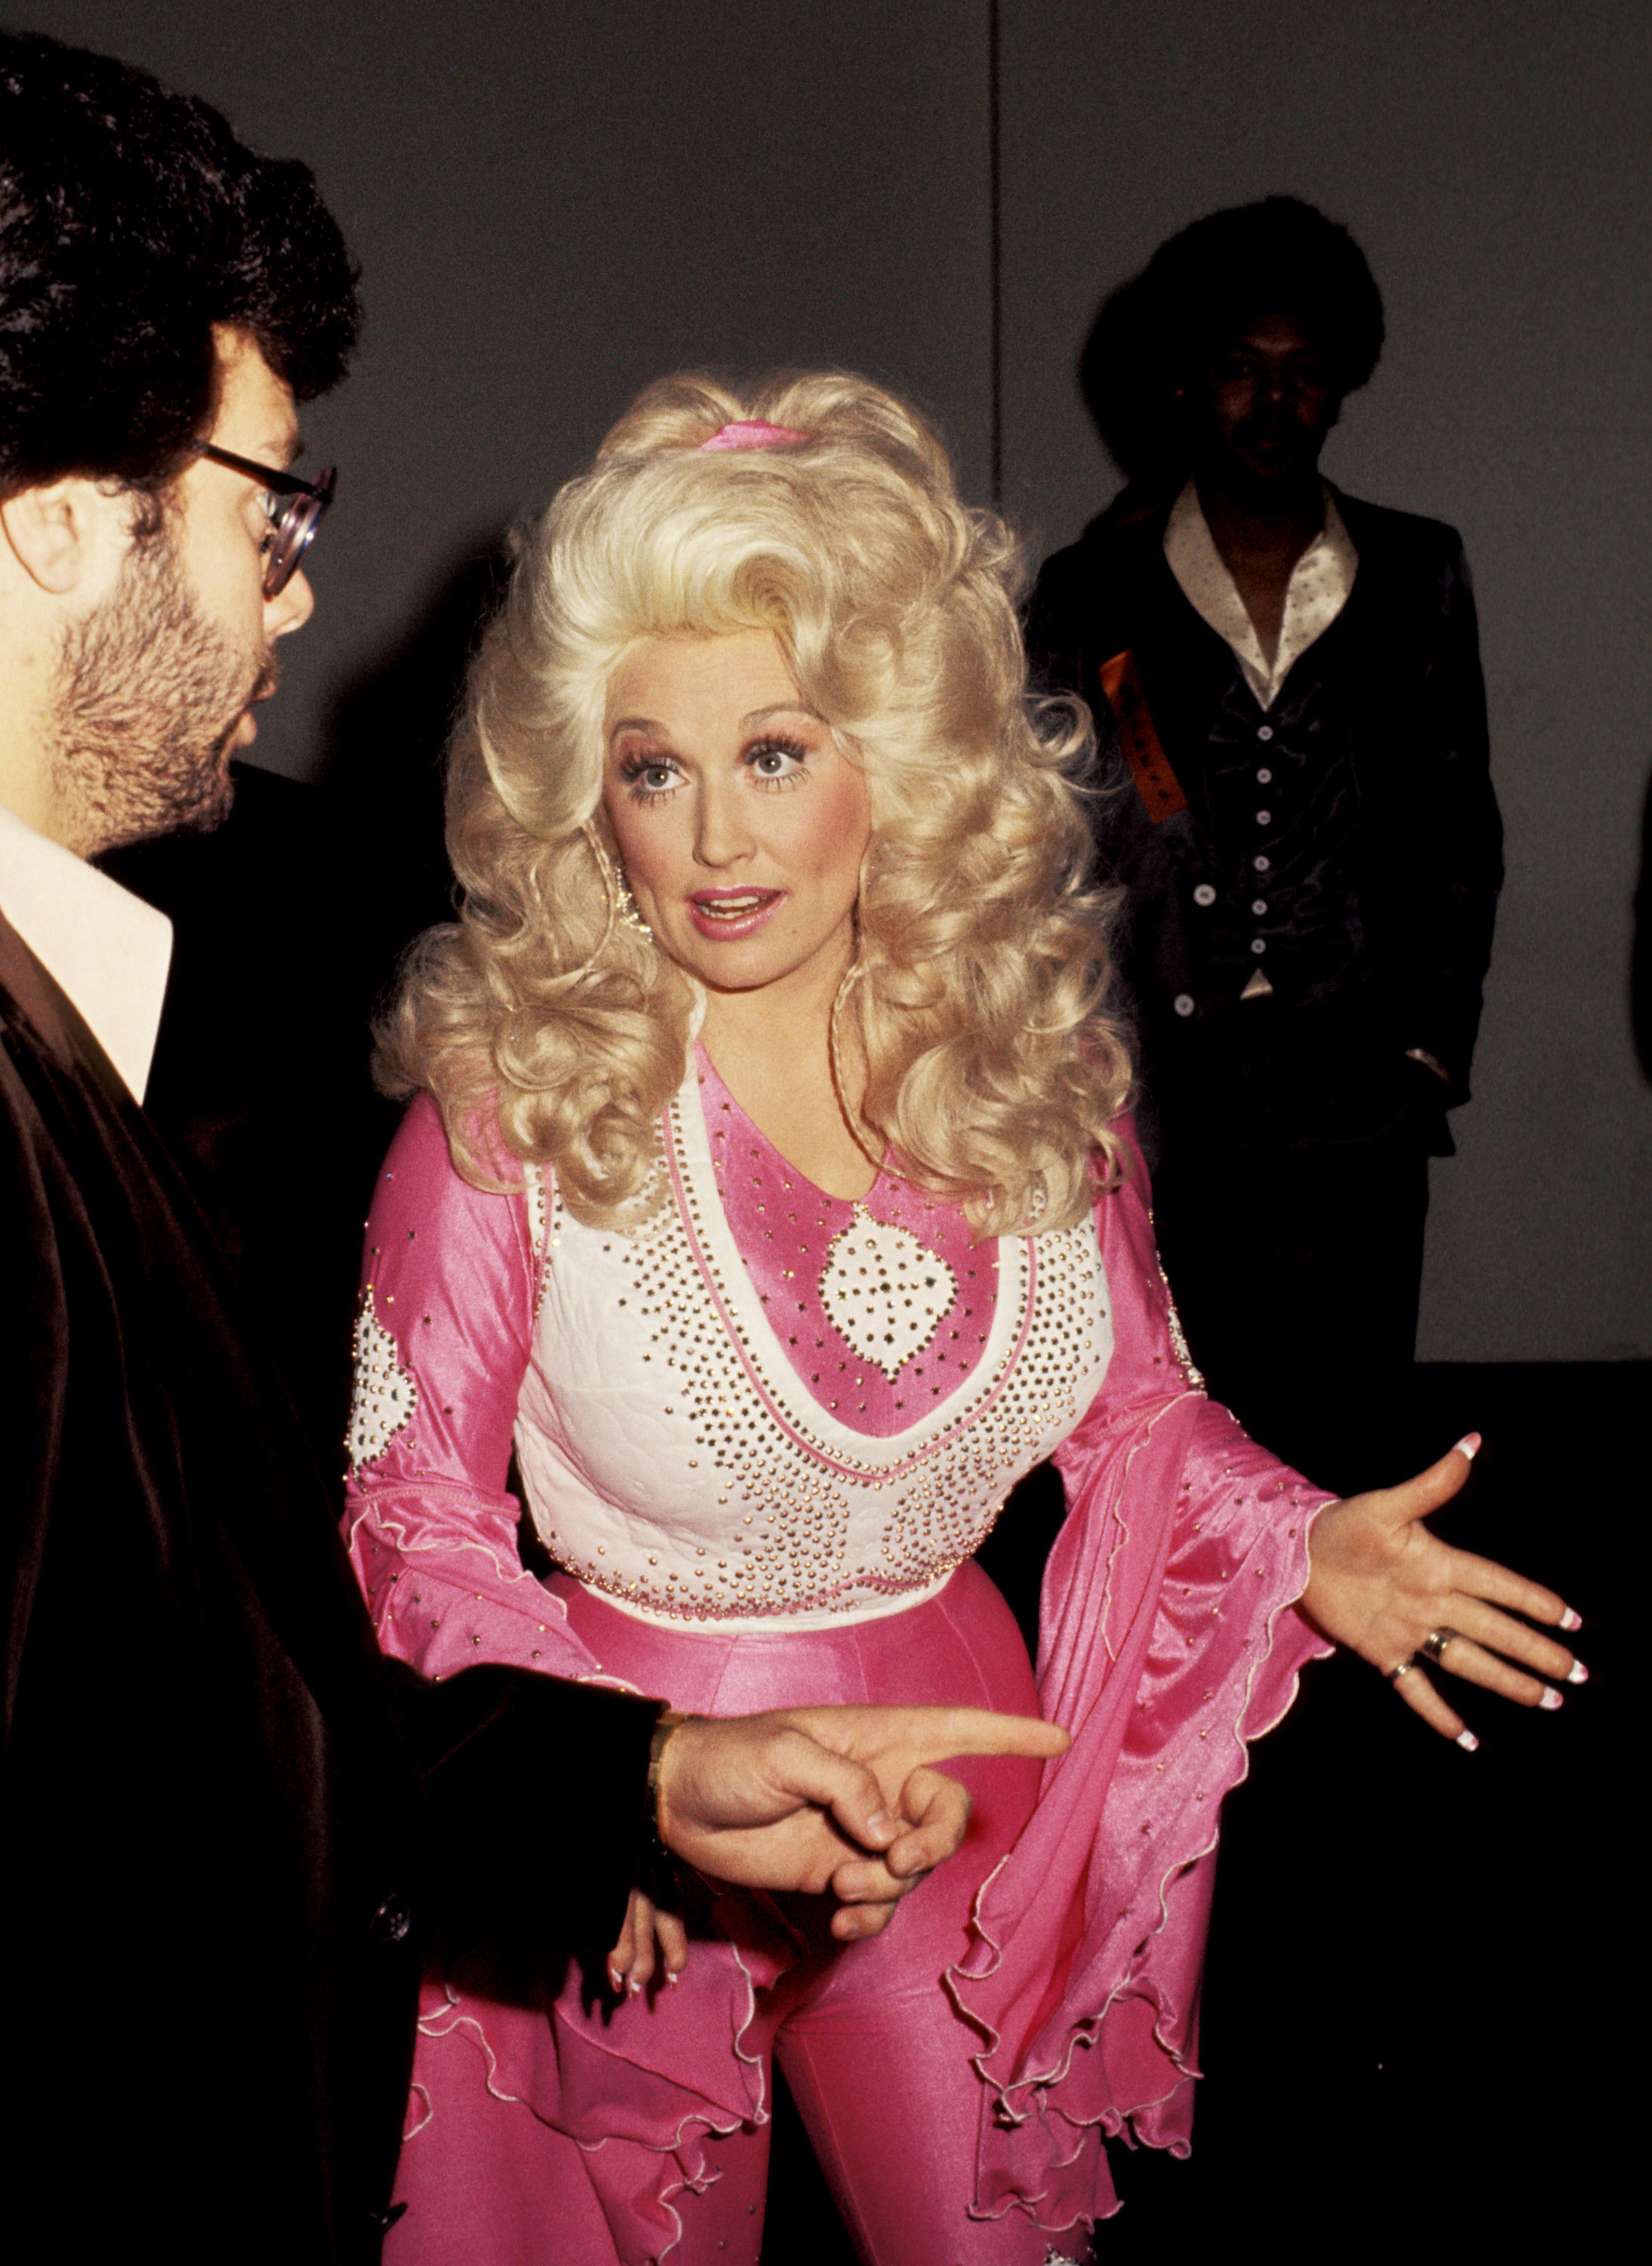 Dolly Parton at the 19th Annual Grammy Awards on February 19, 1977. | Source: Getty Images